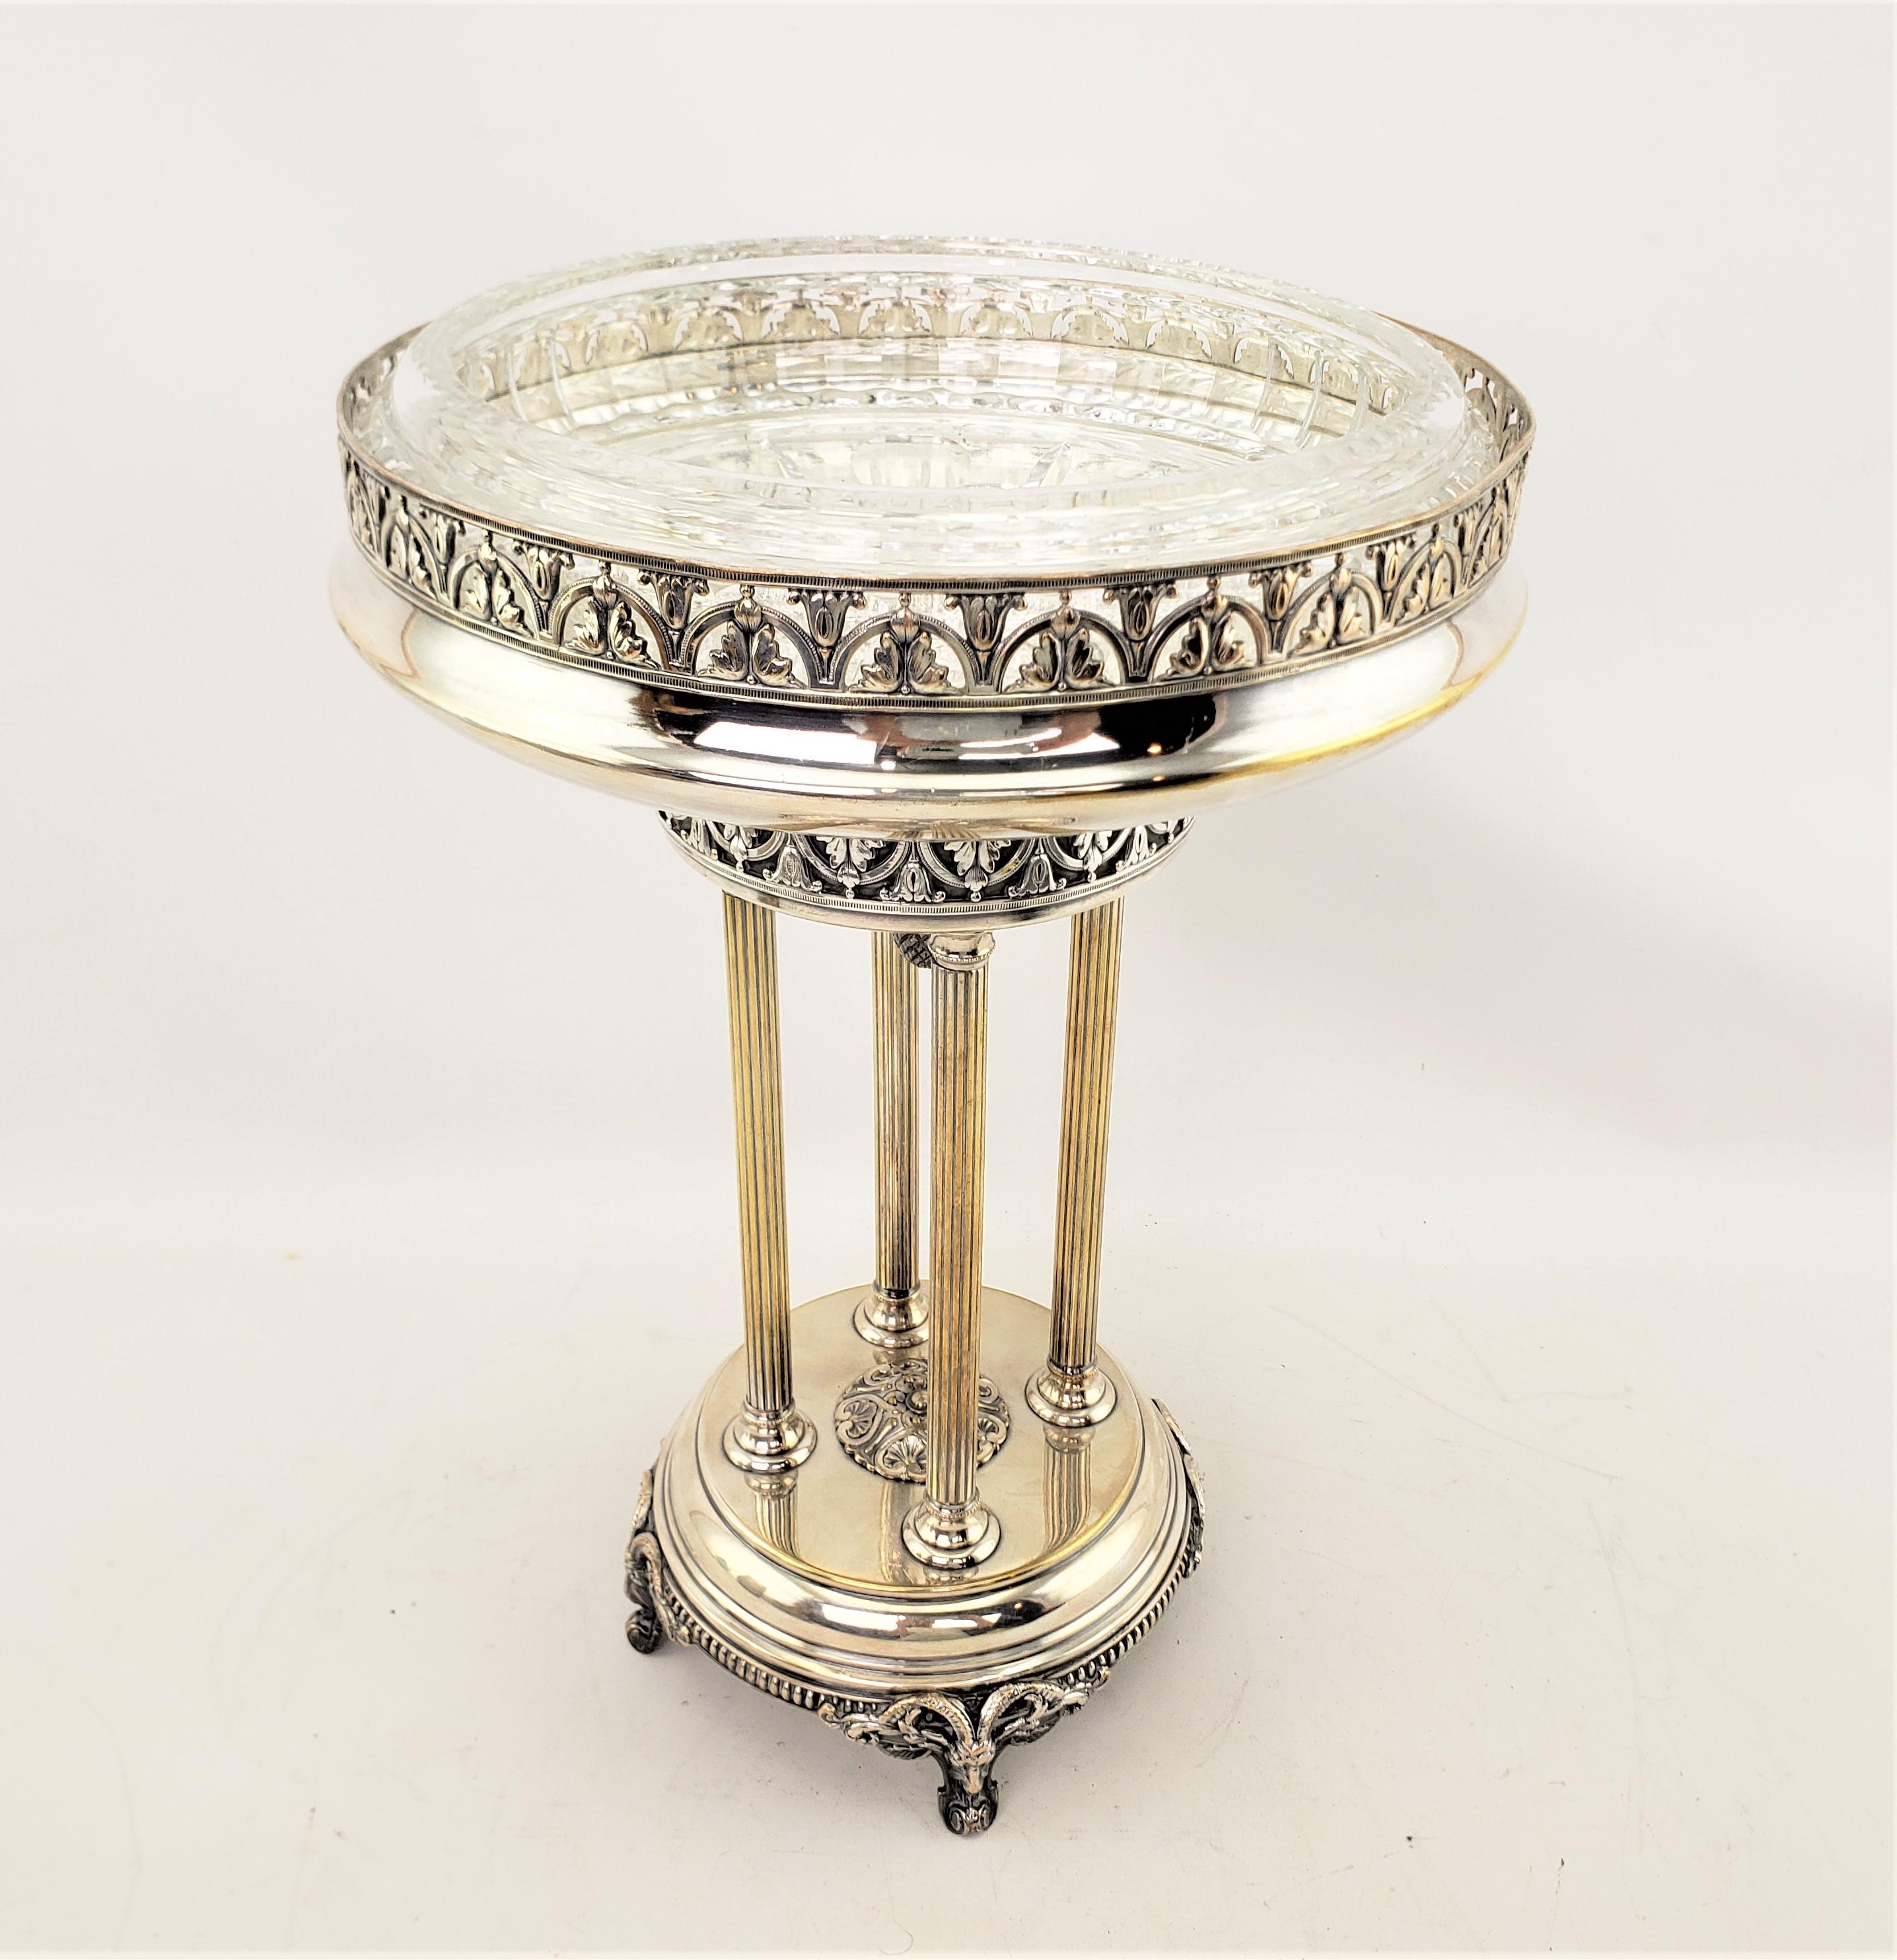 Antique Silver Plated Centerpiece in the Neoclassical Revival Style In Good Condition For Sale In Hamilton, Ontario